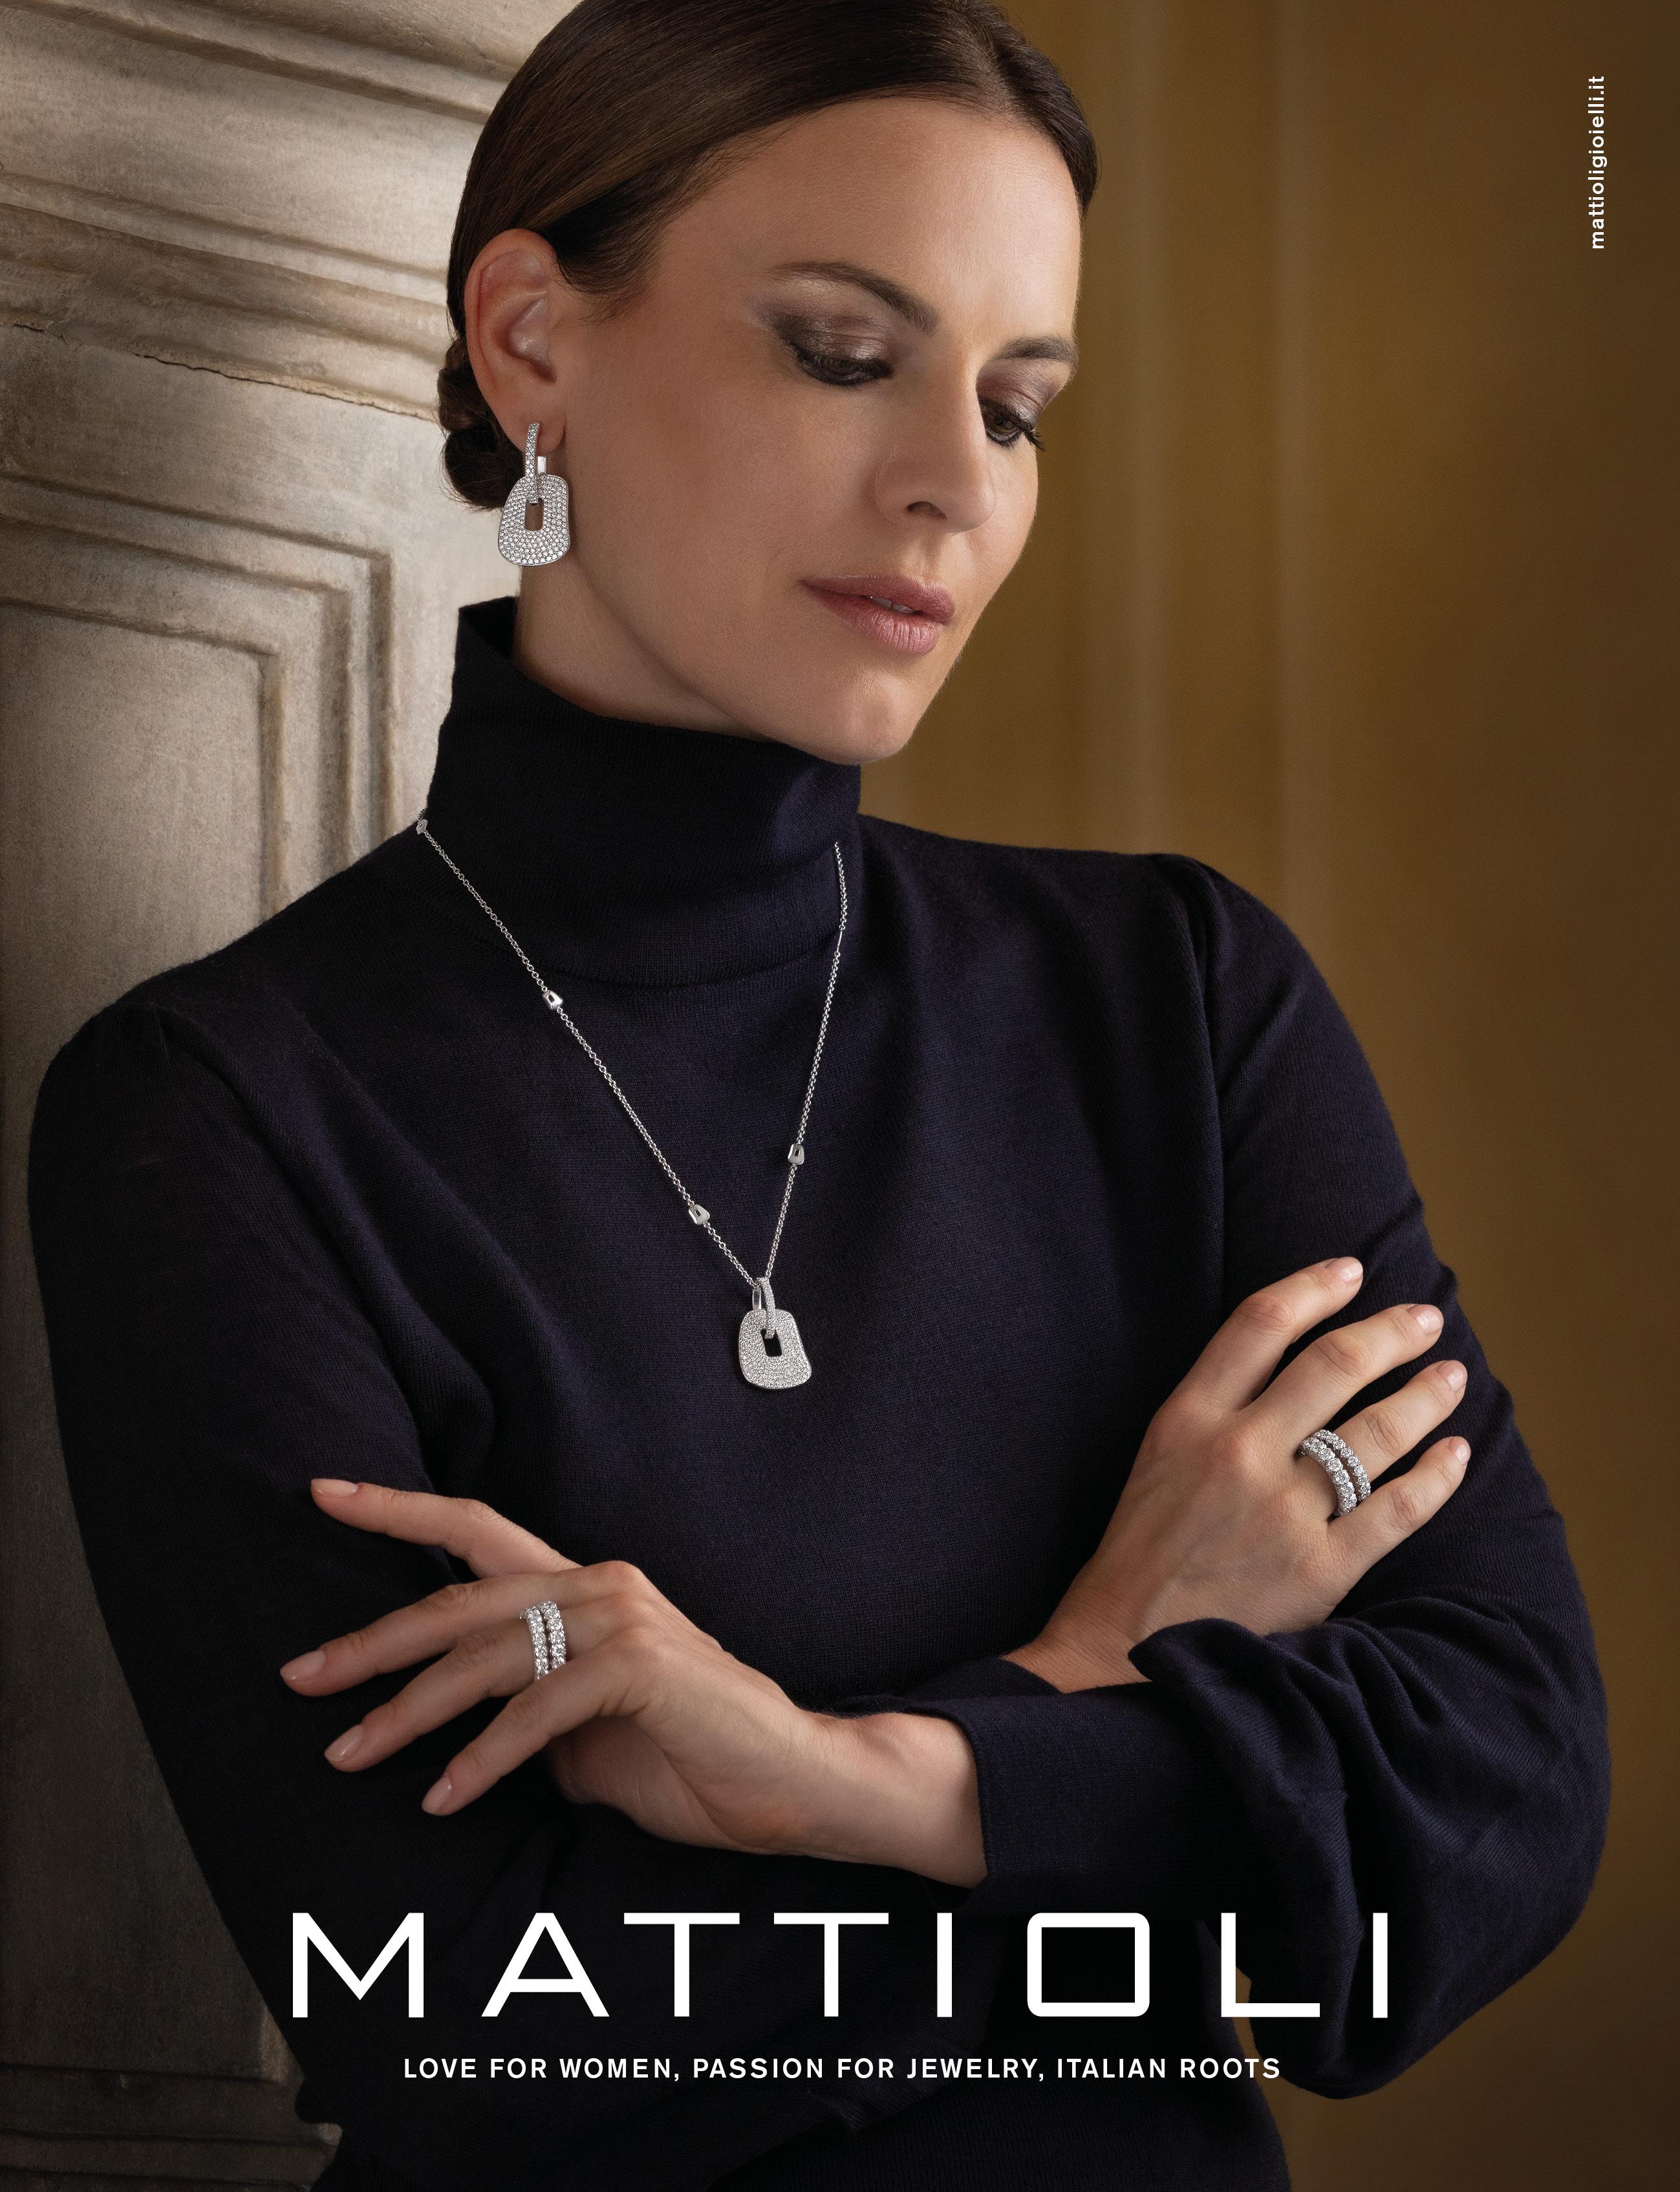 Mattioli Puzzle Collection 18 Karat in White Gold, White Diamonds & Black Onyx with White Gold & White Diamonds Frame Small Size Earrings
Measure 15x18 mm / 0,59x0,70 in. 
Gold Weight 05,00 gr. 
Diamonds 0,68 ct.

READY TO SHIP
*Shipment of this